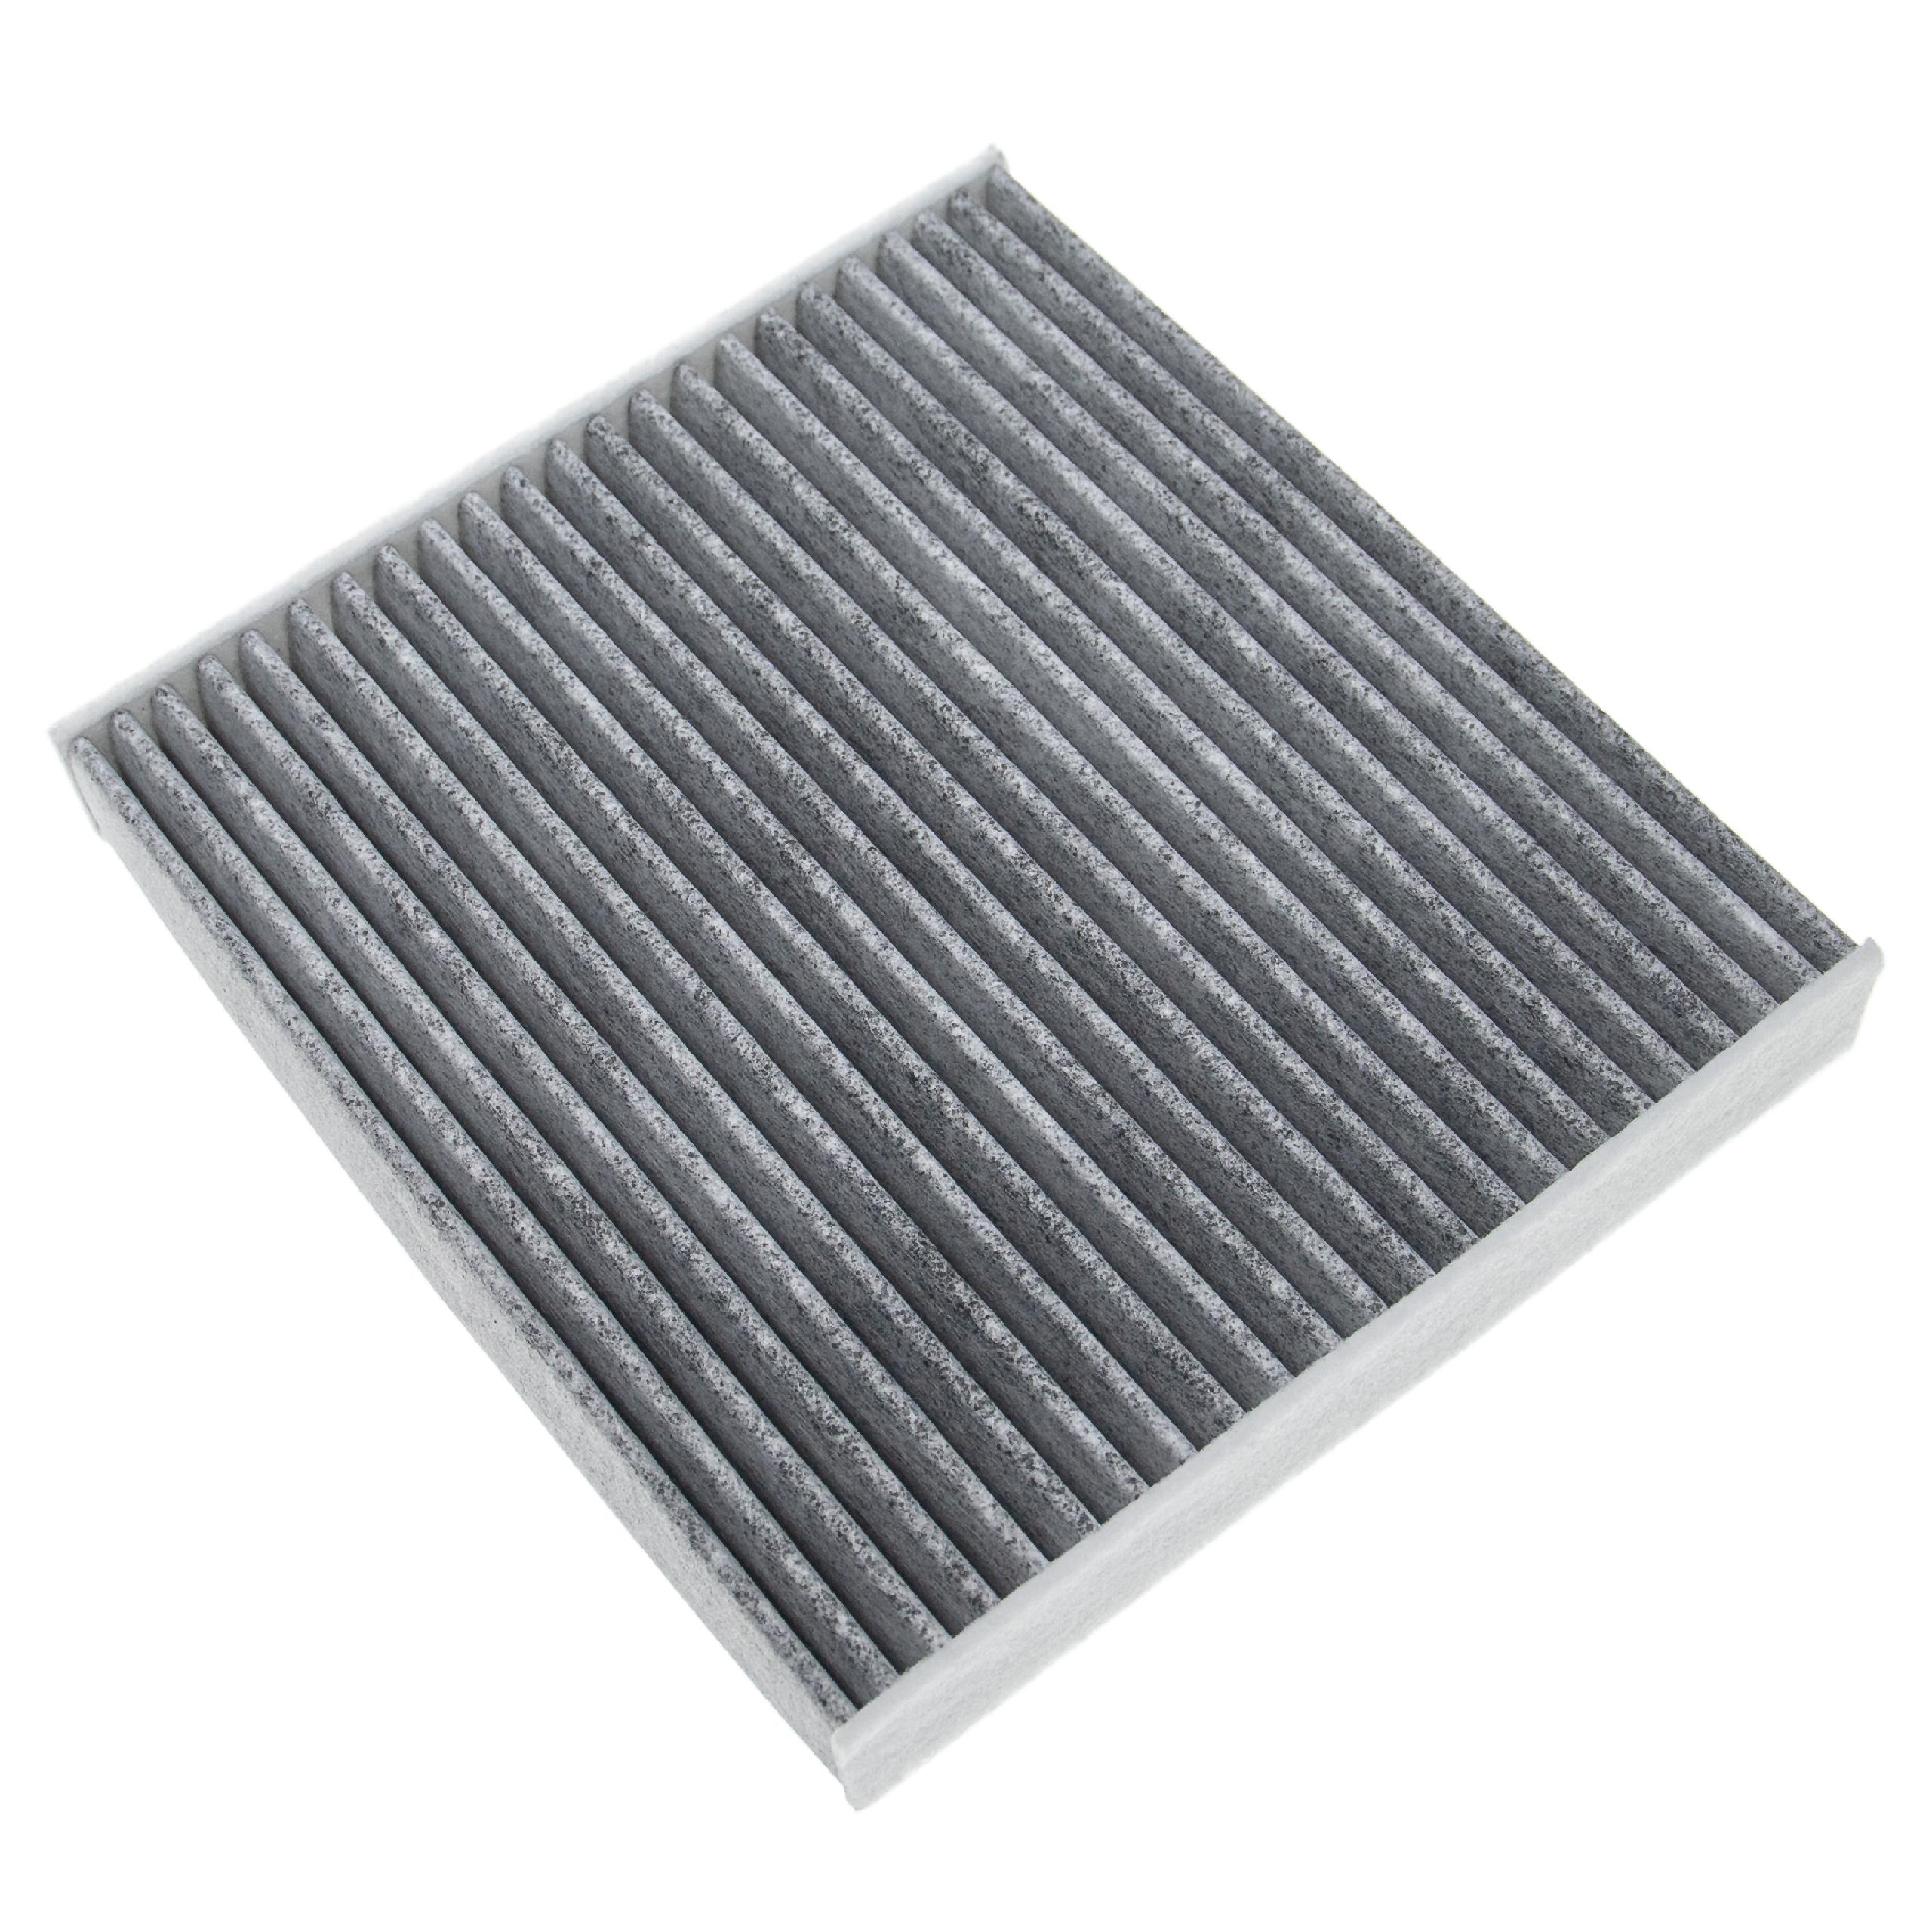 Cabin Air Filter replaces Comline EKF 185